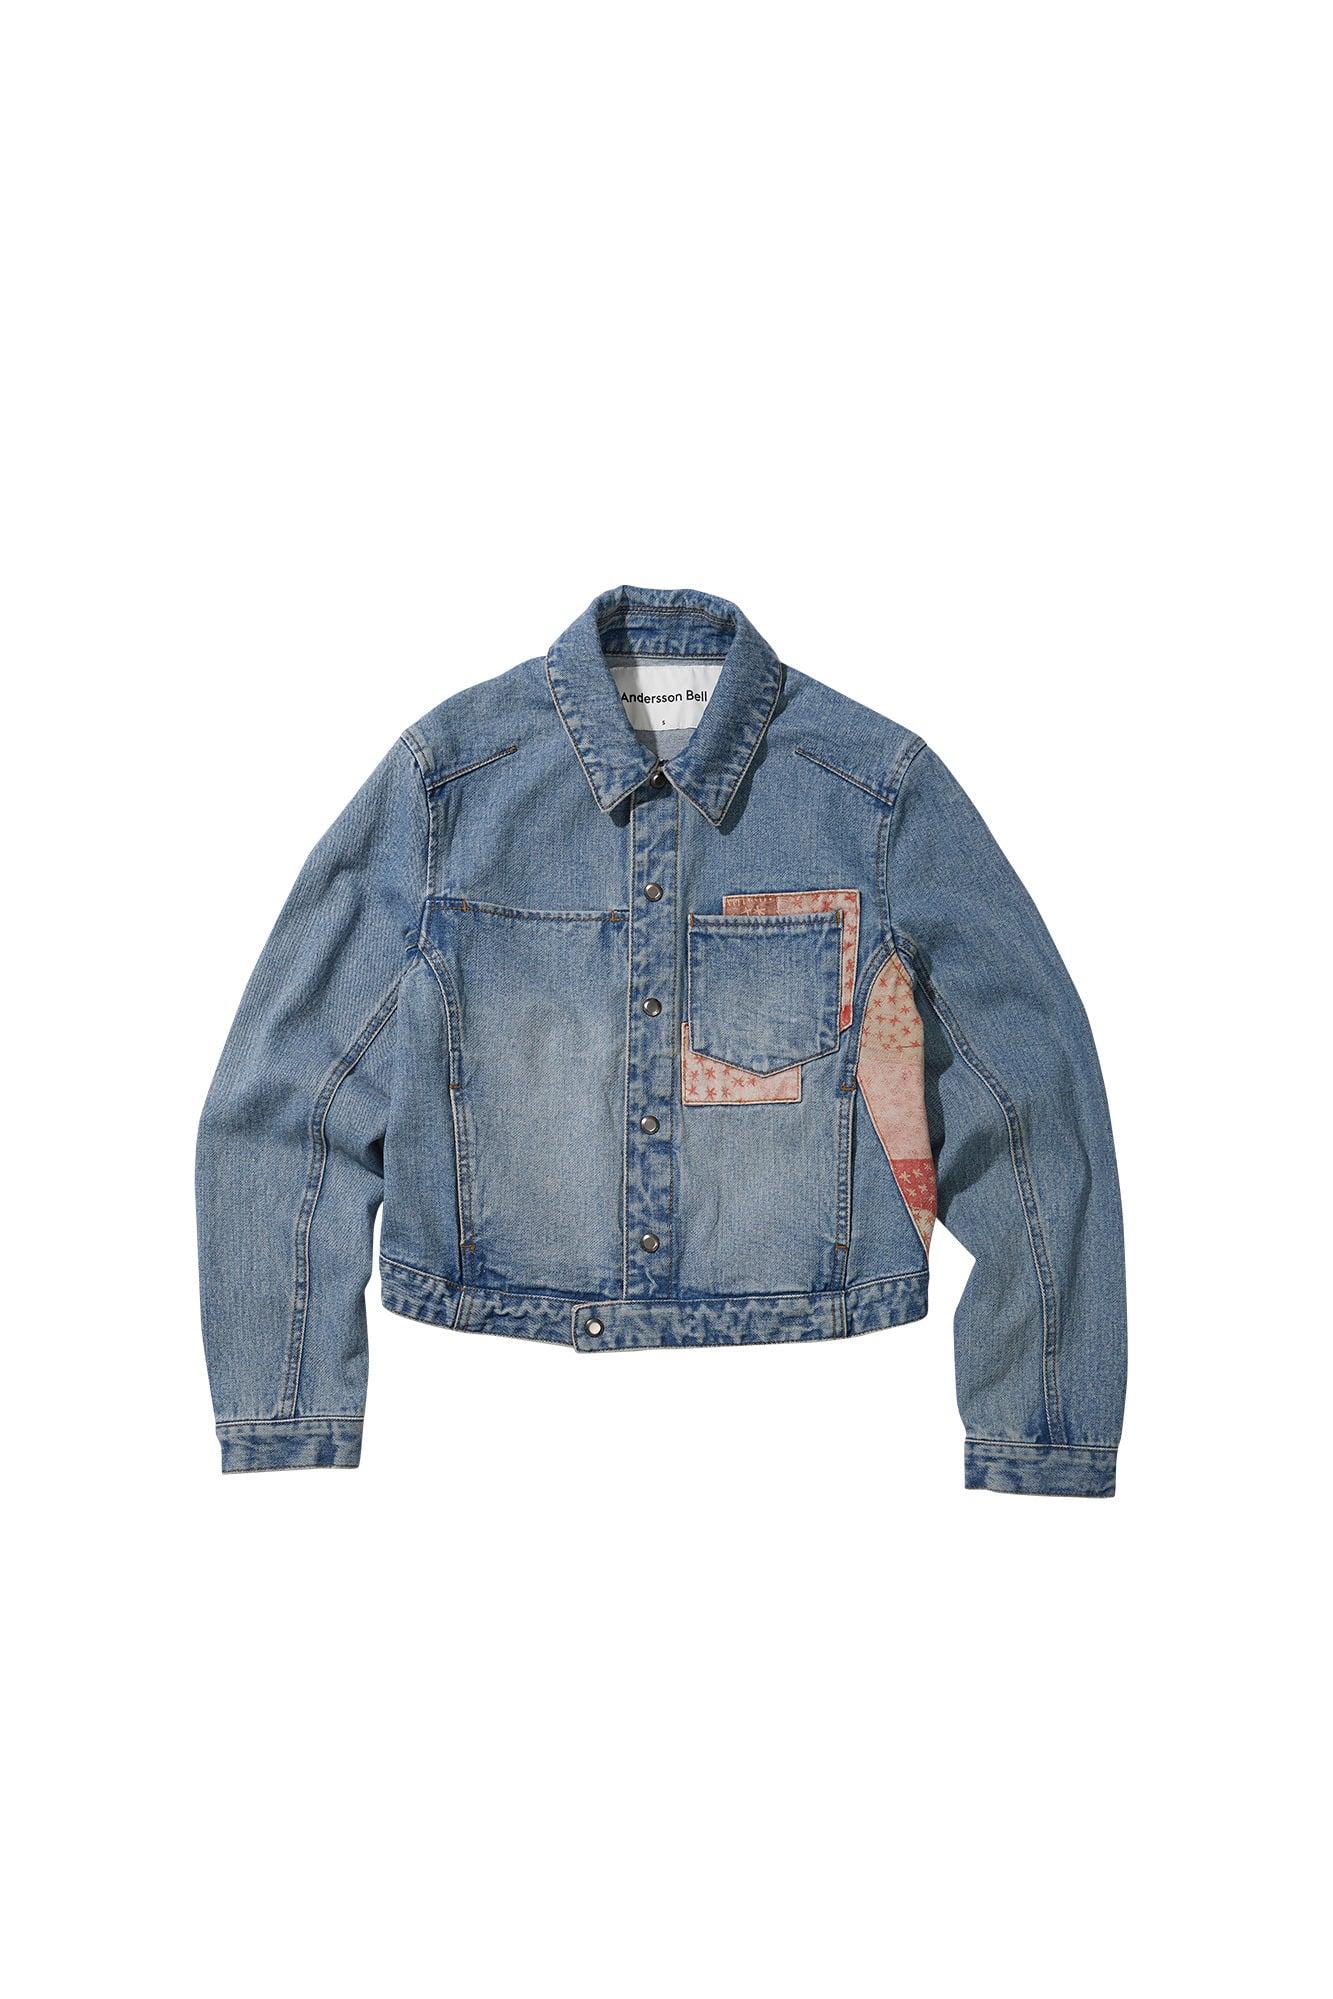 ANDERSSON BELL Clown Patch Denim Jacket in Blue | Lyst